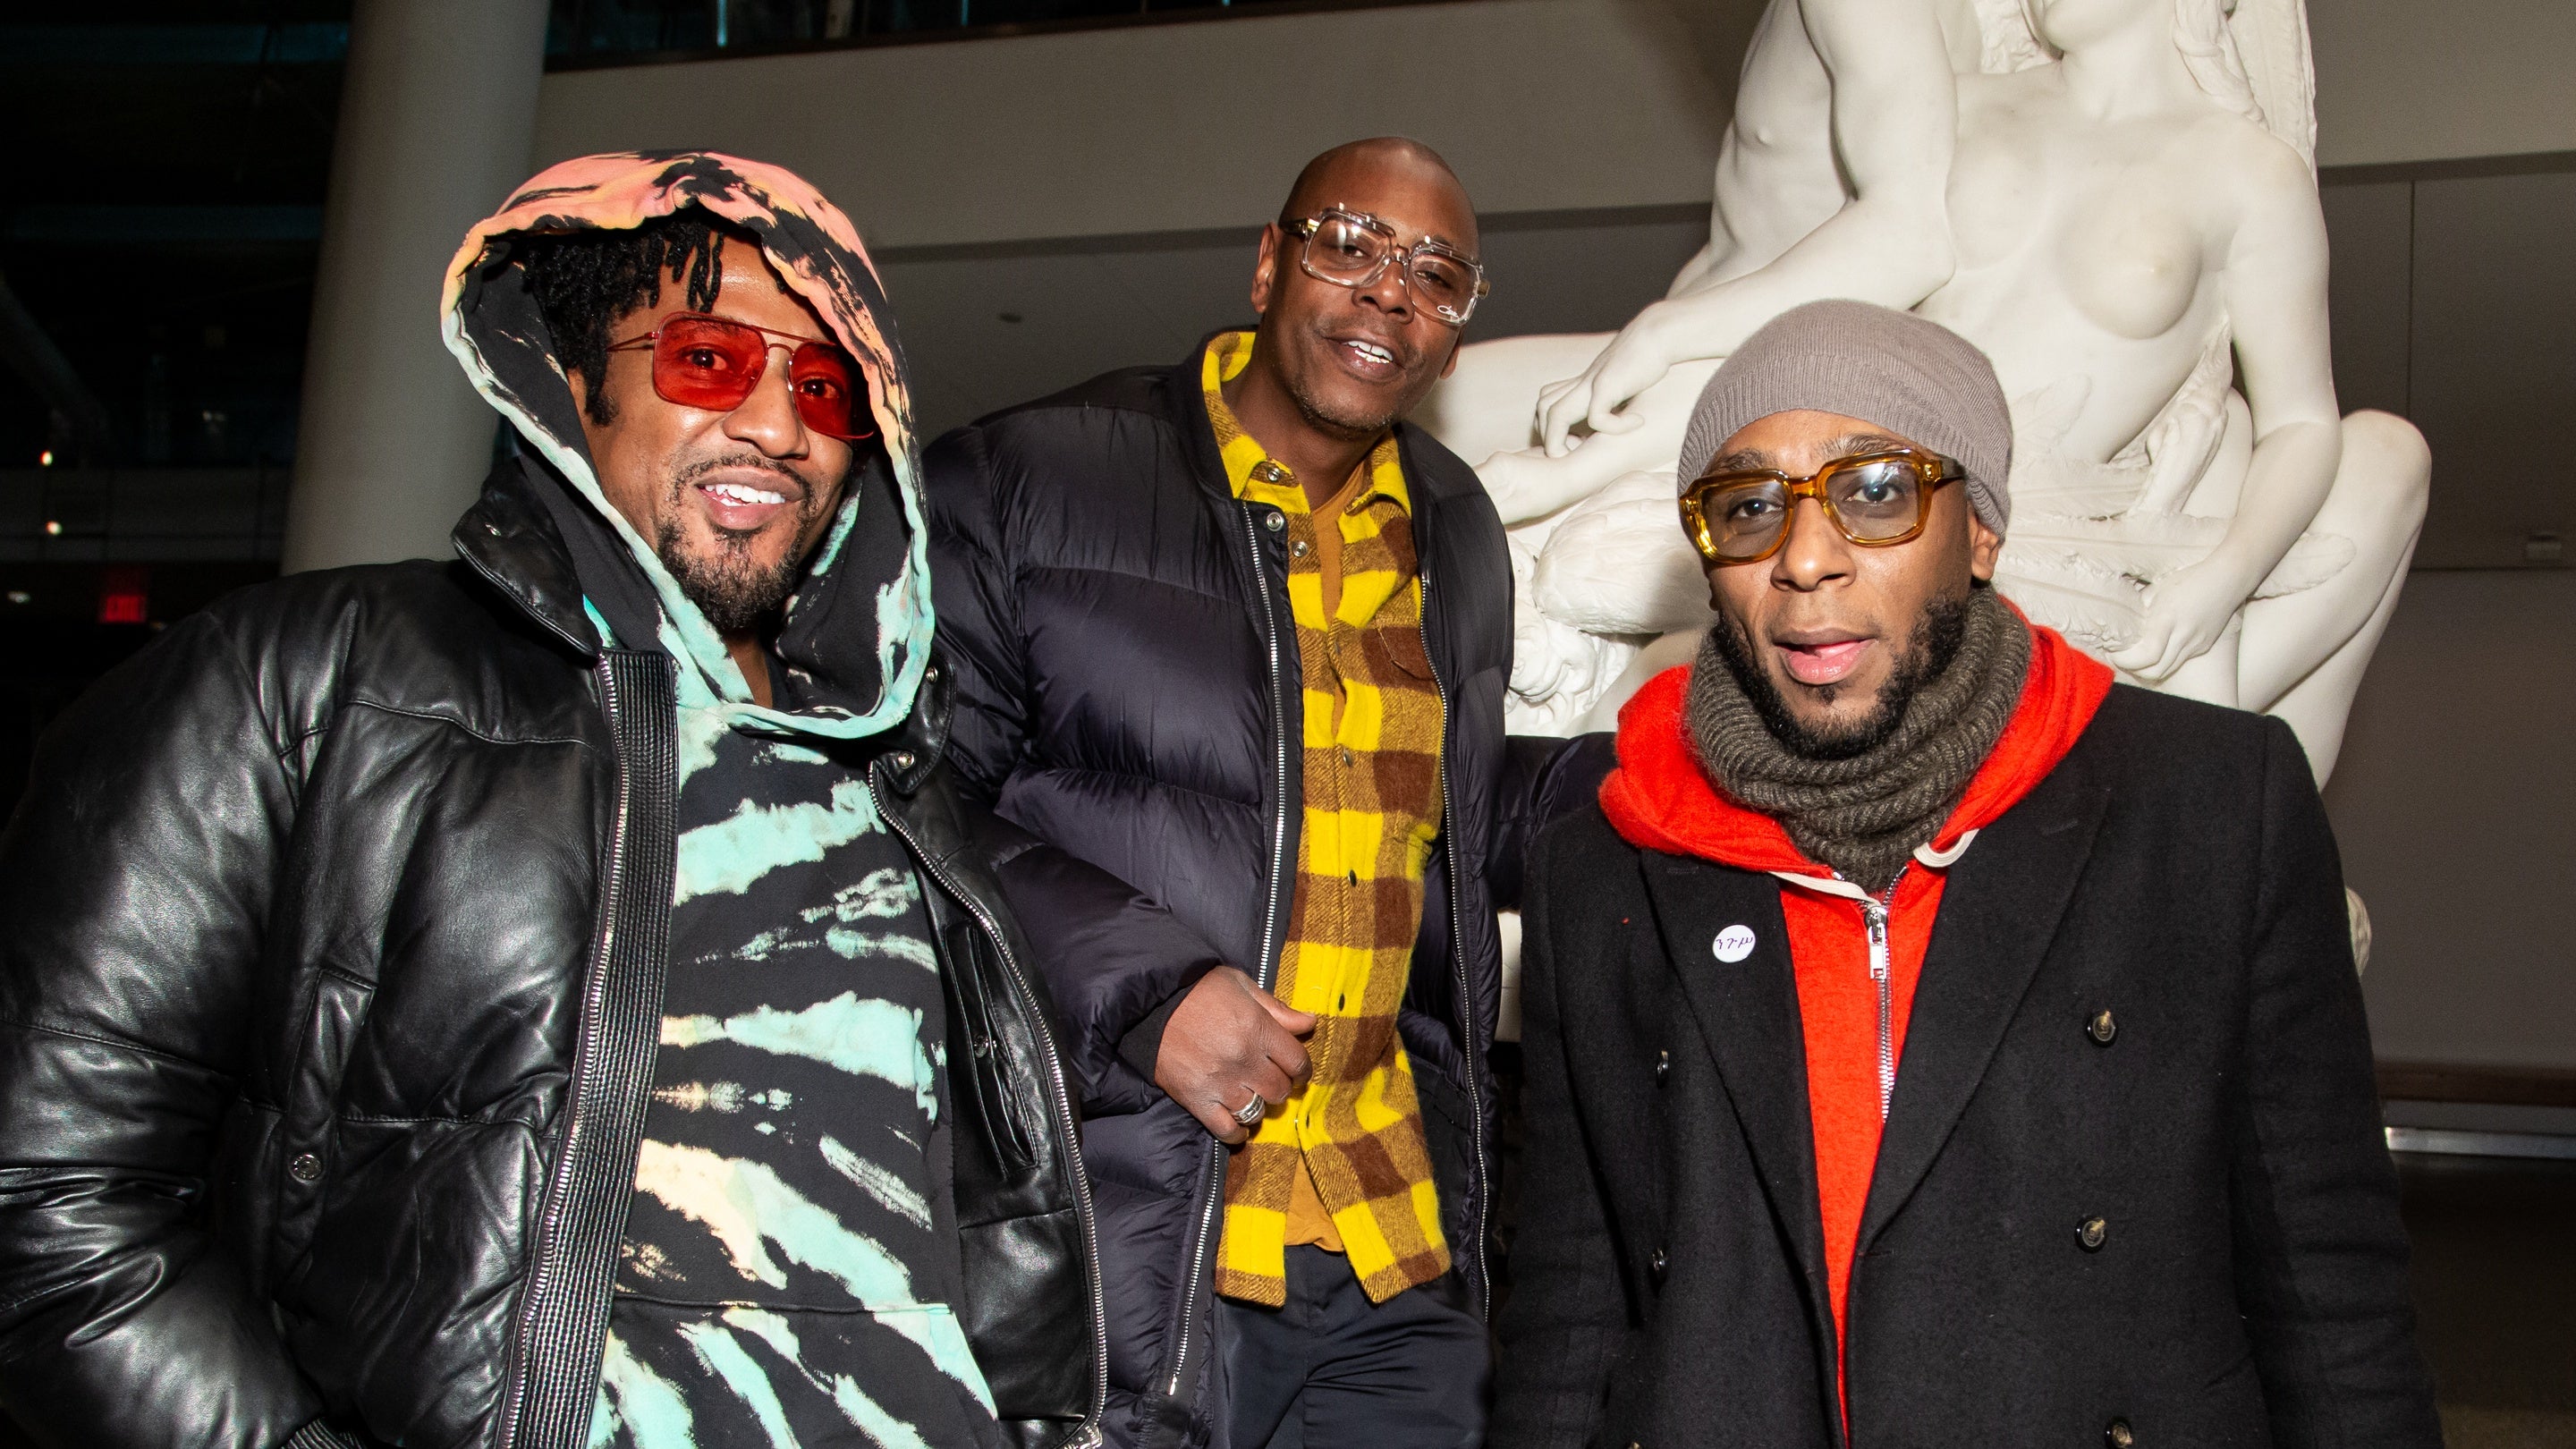 Dave Chappelle, Q-Tip & Brooklyn Show Out for Yasiin Bey’s ‘Negus’ Premiere